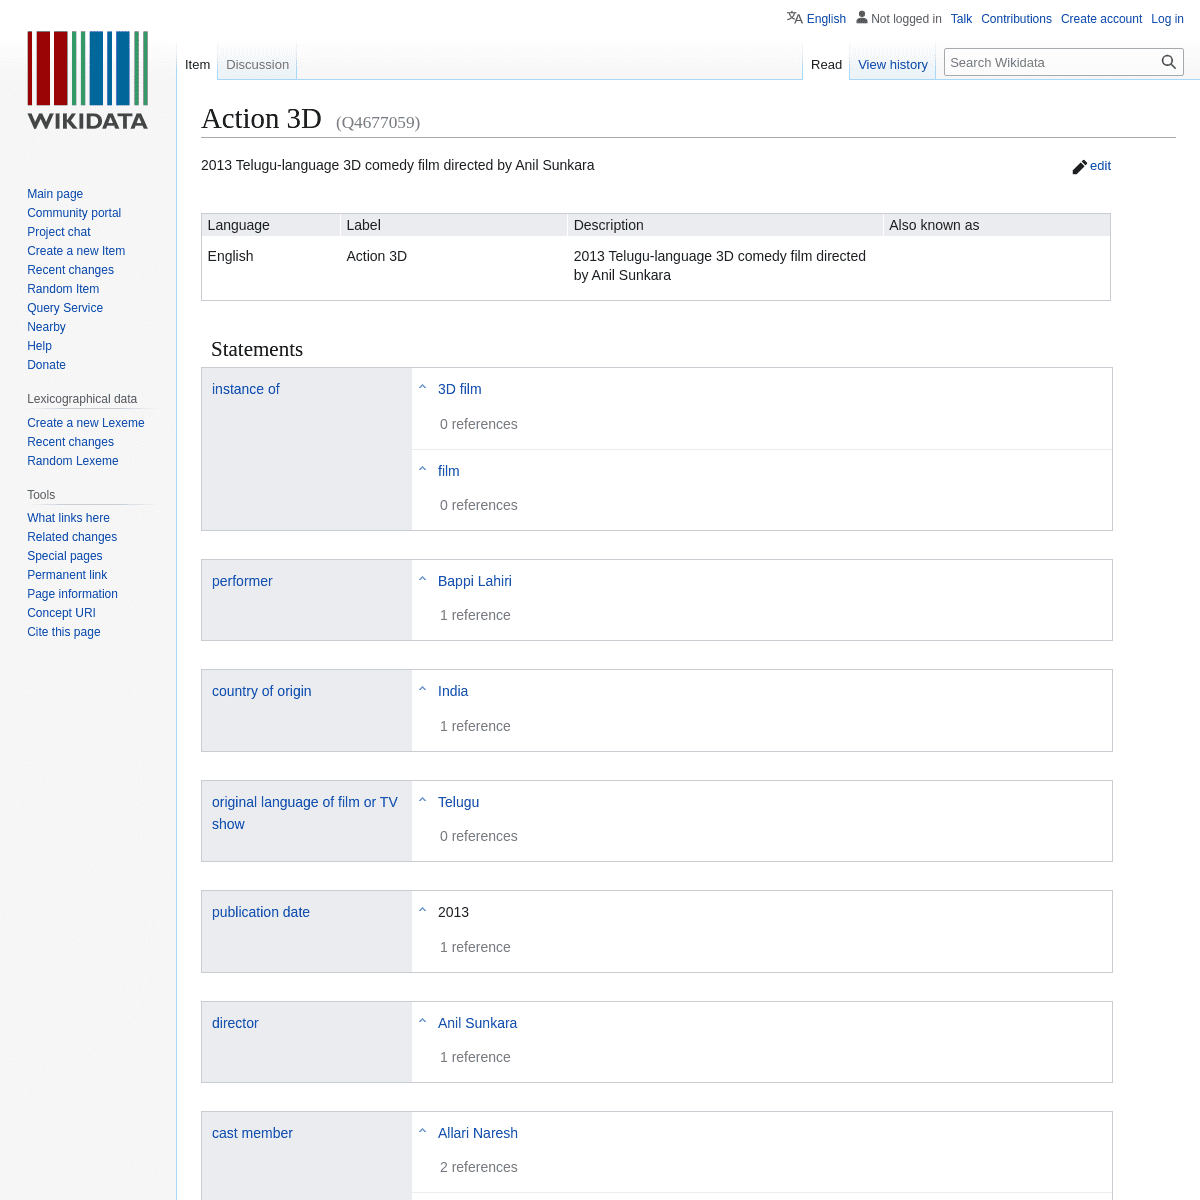 A complete backup of https://www.wikidata.org/wiki/Q4677059